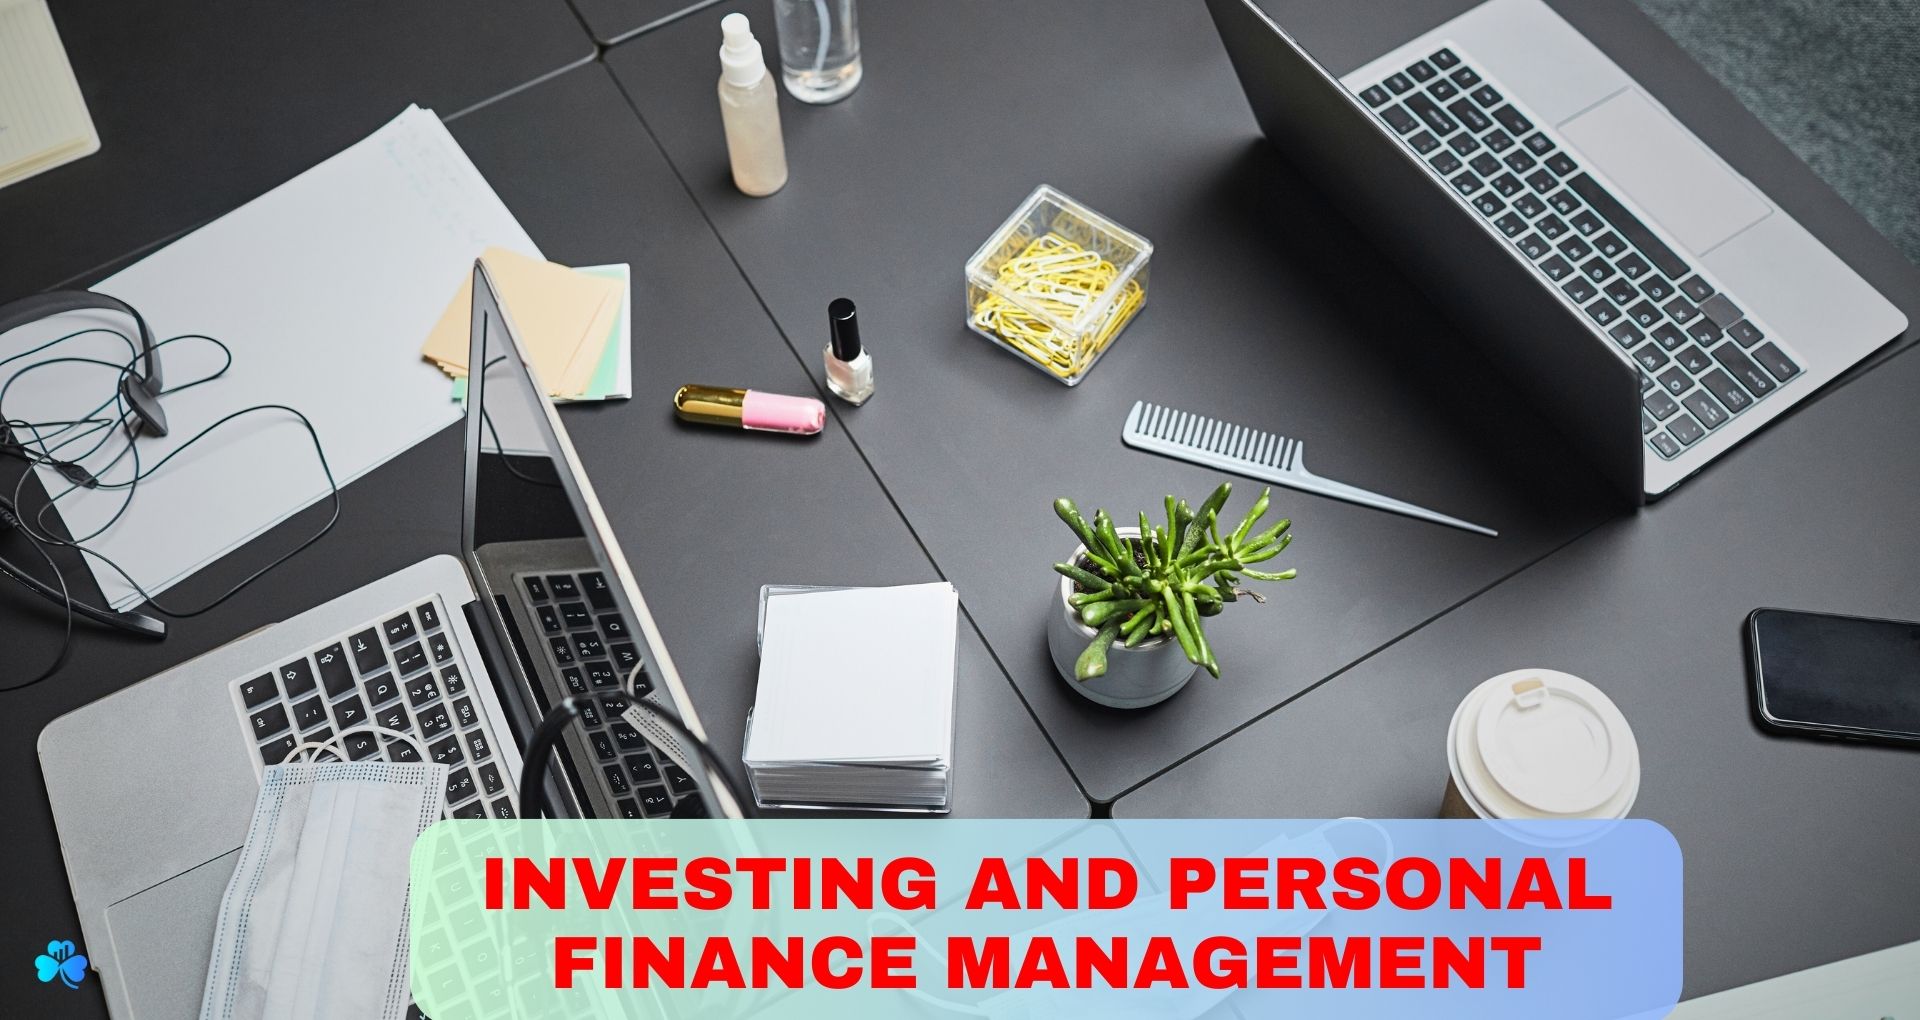 Investing and personal finance management